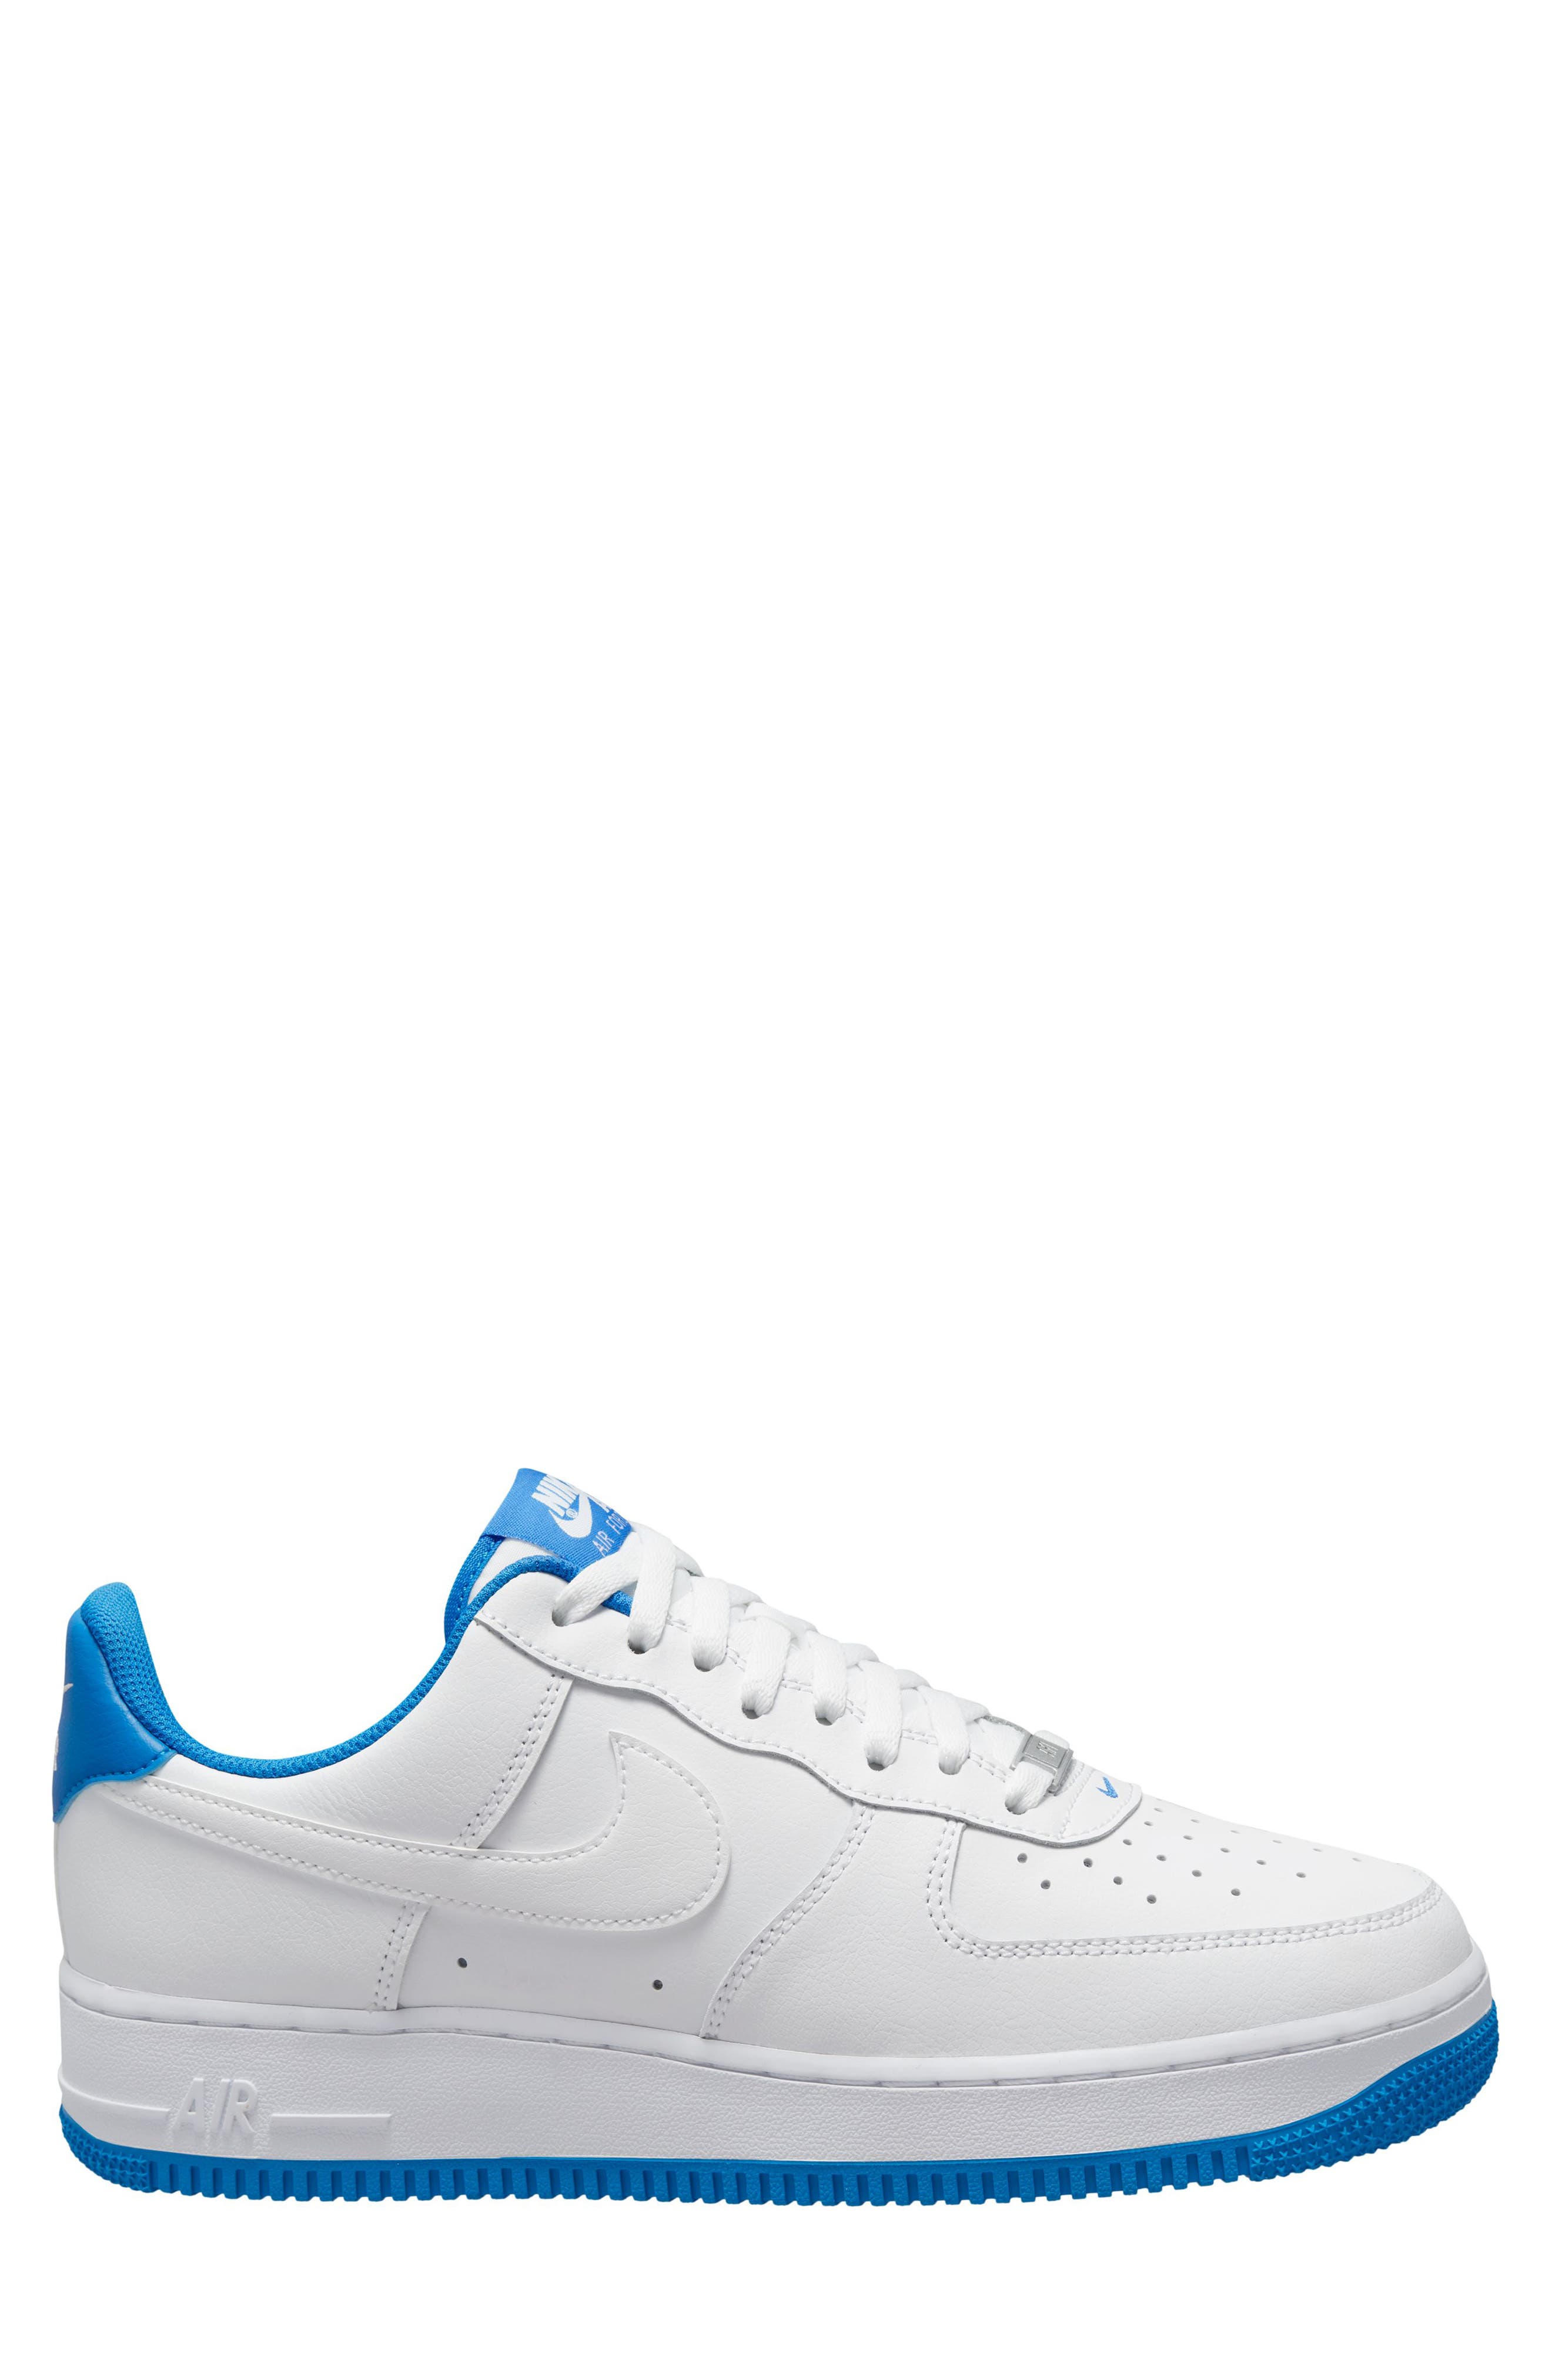 white nike air force 1 nordstrom